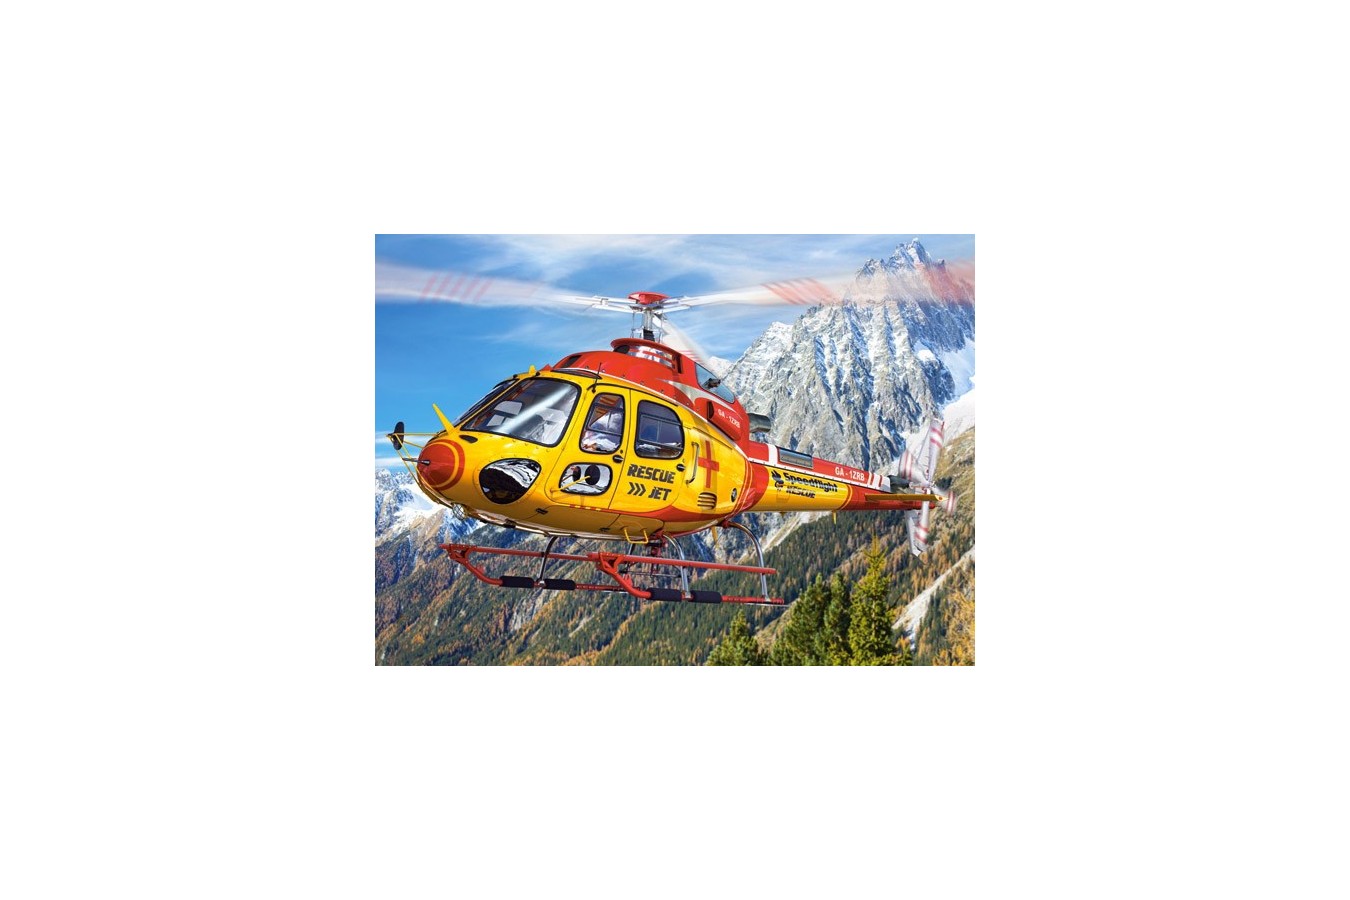 Puzzle Castorland - Helicopter Rescue, 260 Piese